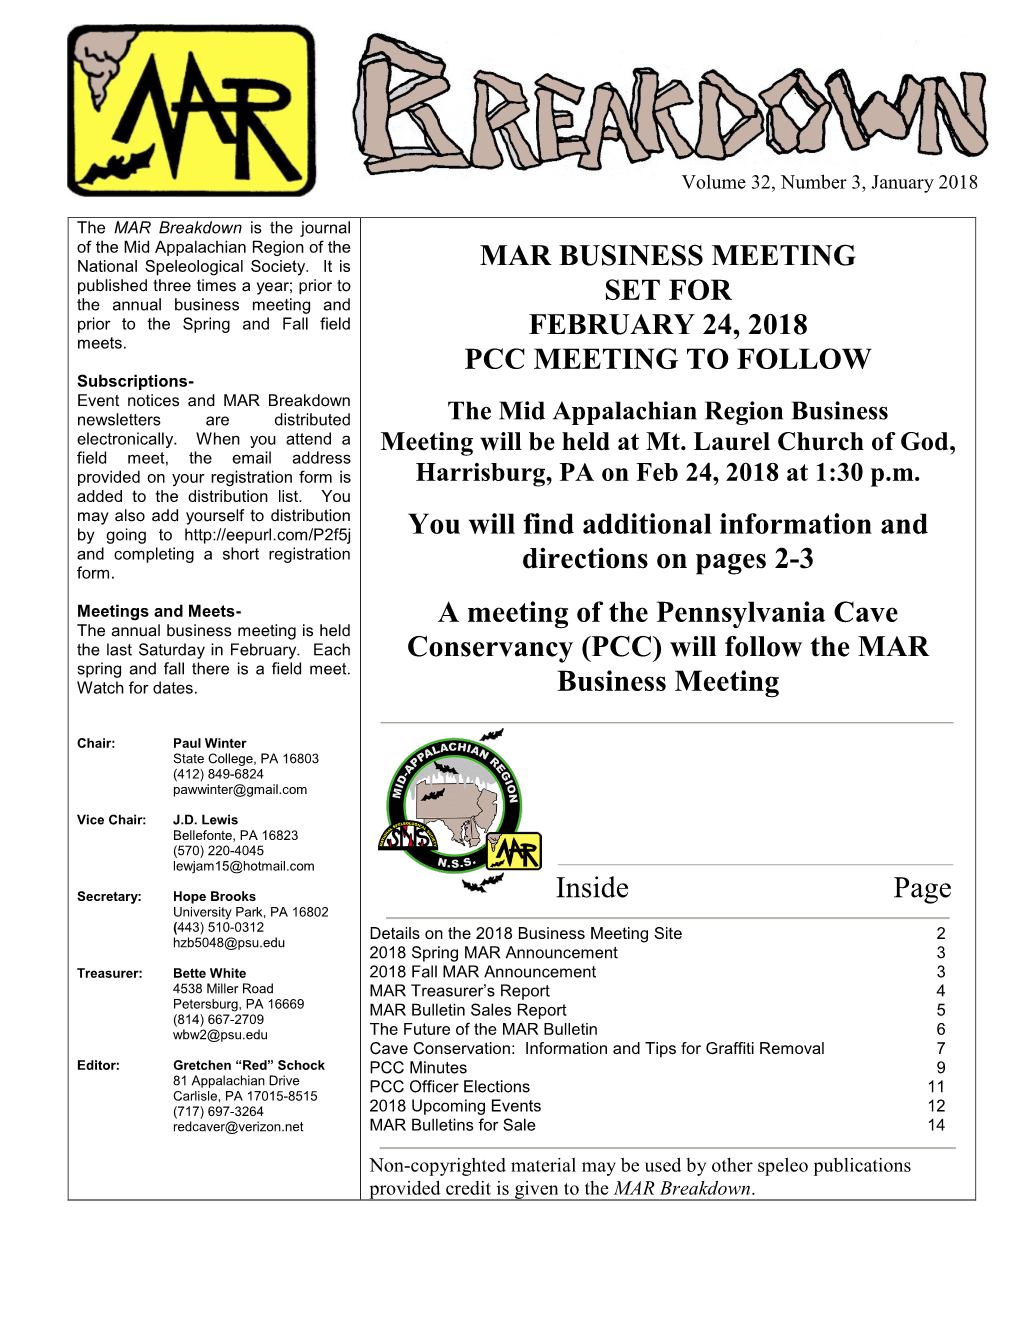 Mar Business Meeting Set for February 24, 2018 Pcc